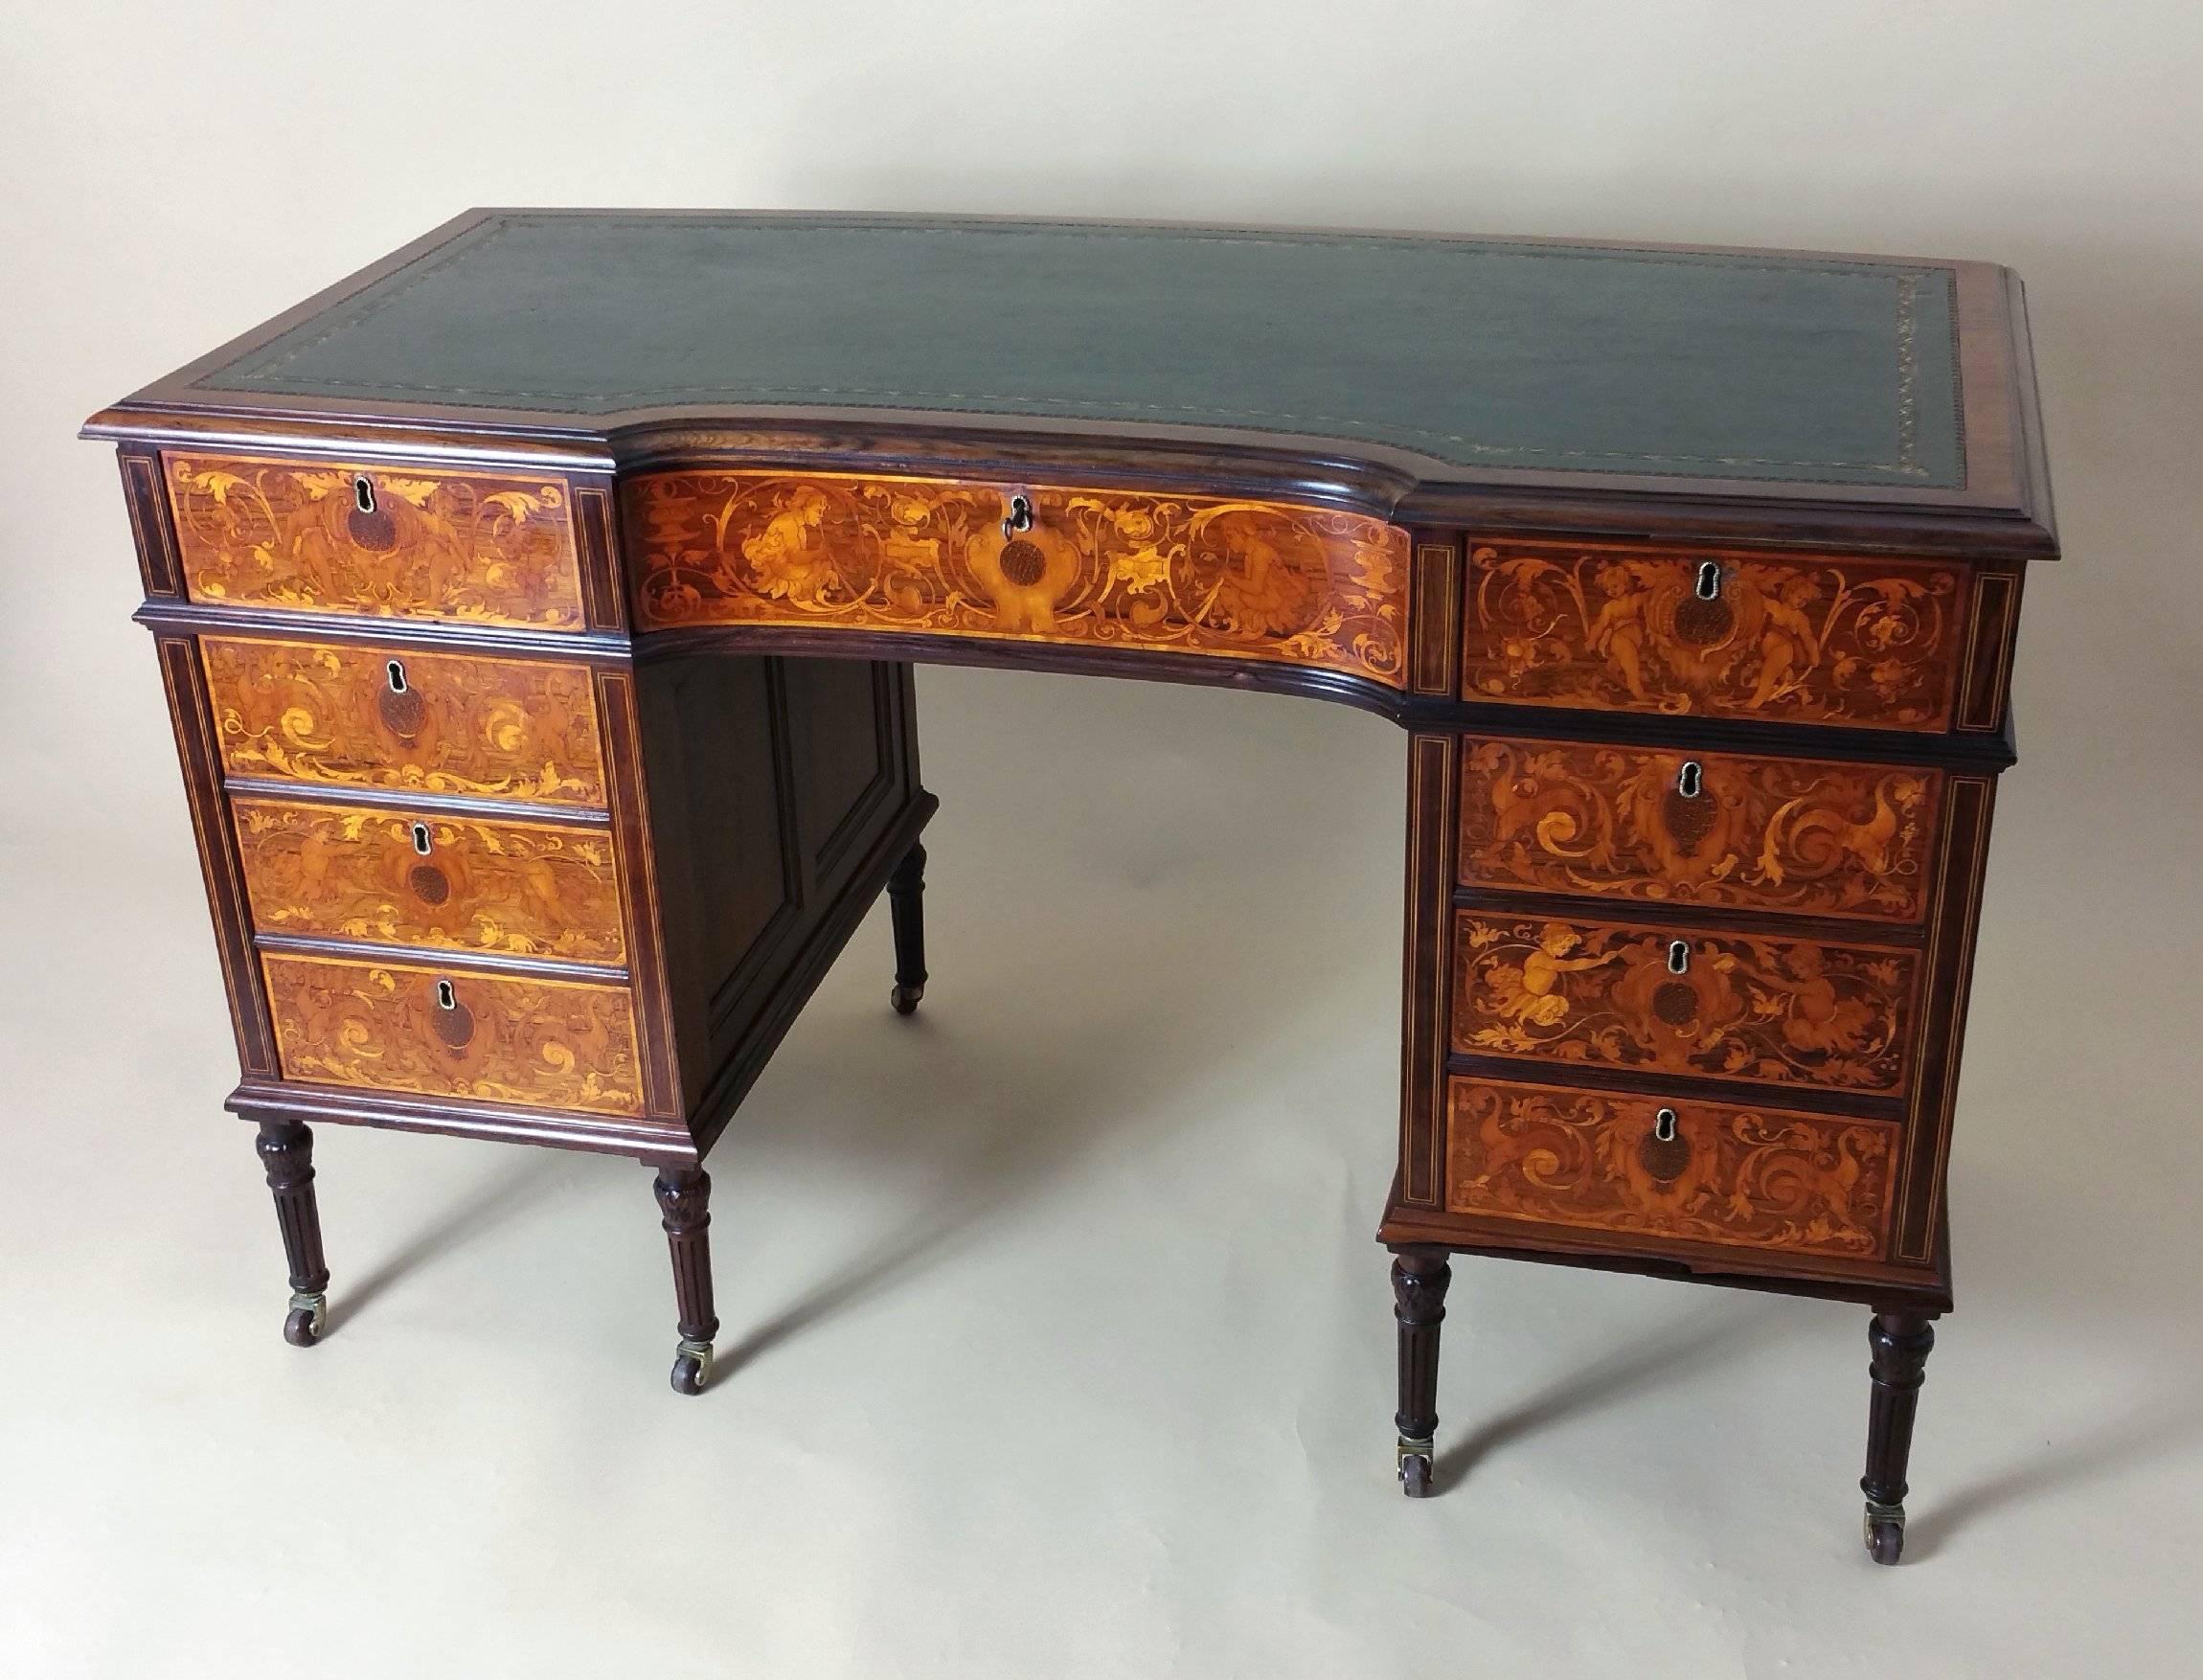 This magnificent Victorian marquetry inlaid rosewood kneehole desk features a shaped front and concave back, inlaid with satinwood, boxwood and palm wood, depicting cherubs and heavy scrollwork. The profuse and ornate inlay work is well executed,